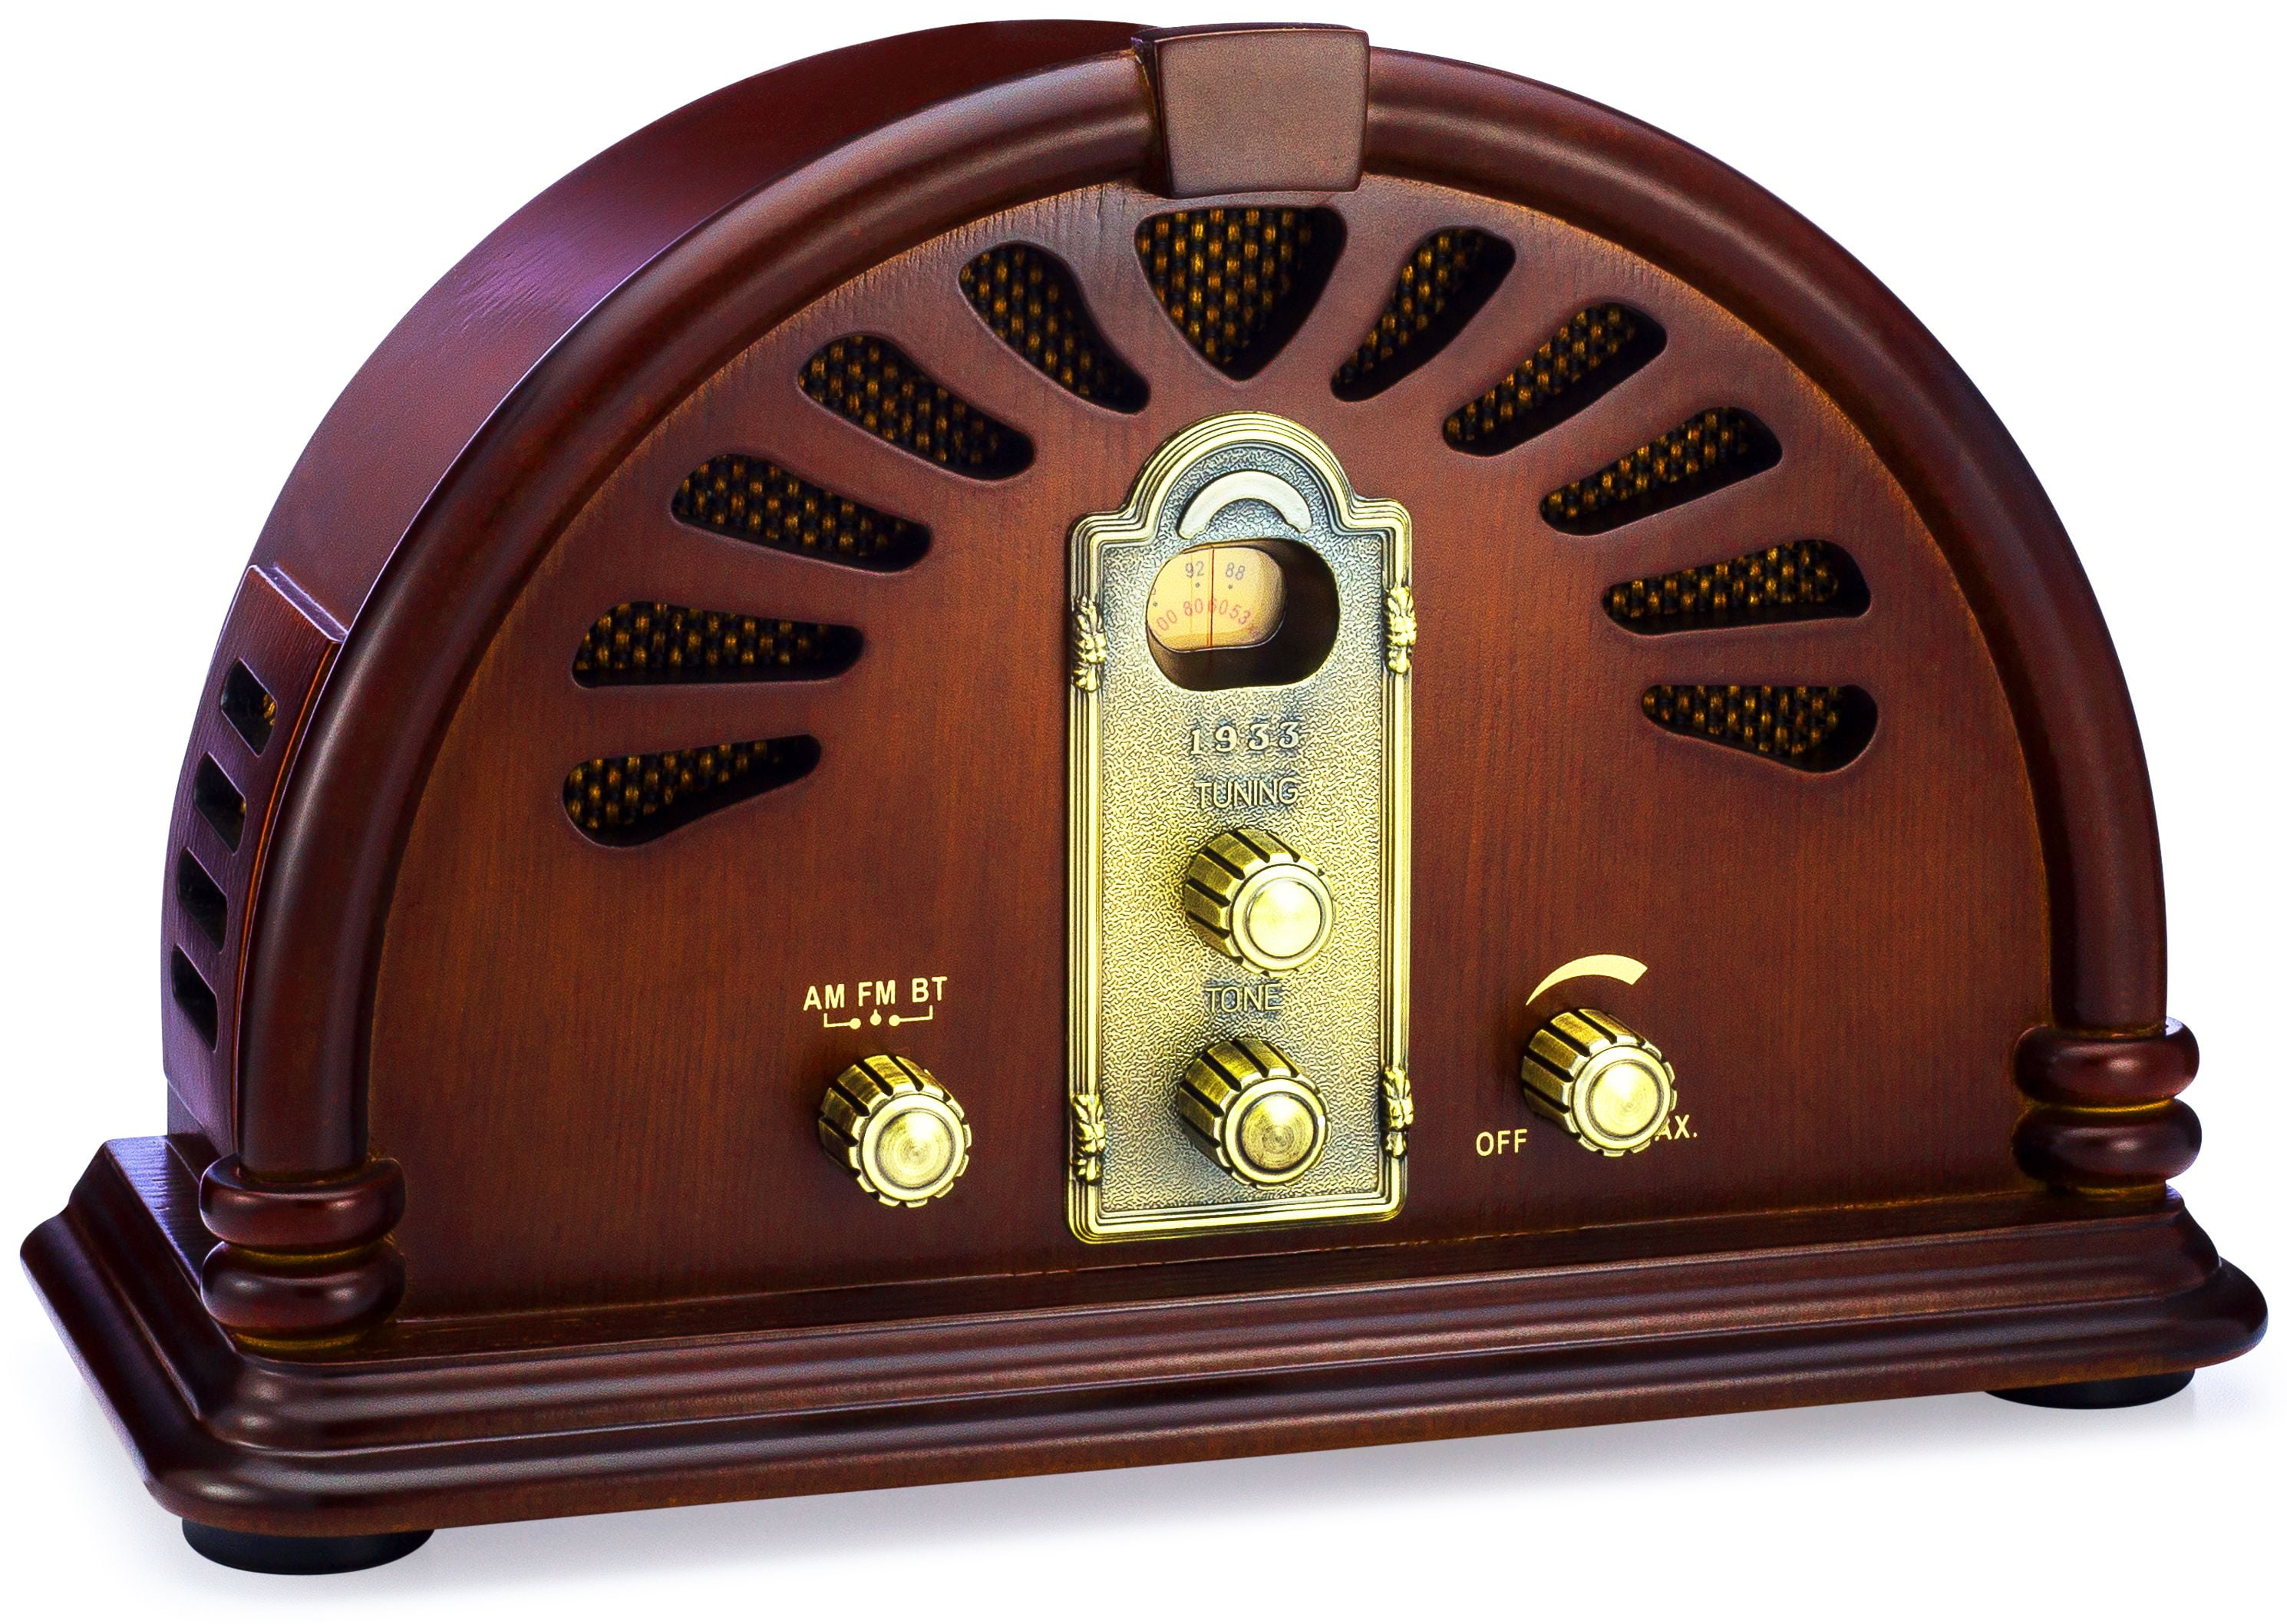 Handmade Wooden Exterior ClearClick Classic Vintage Retro Style AM/FM Radio with Bluetooth & Aux-in